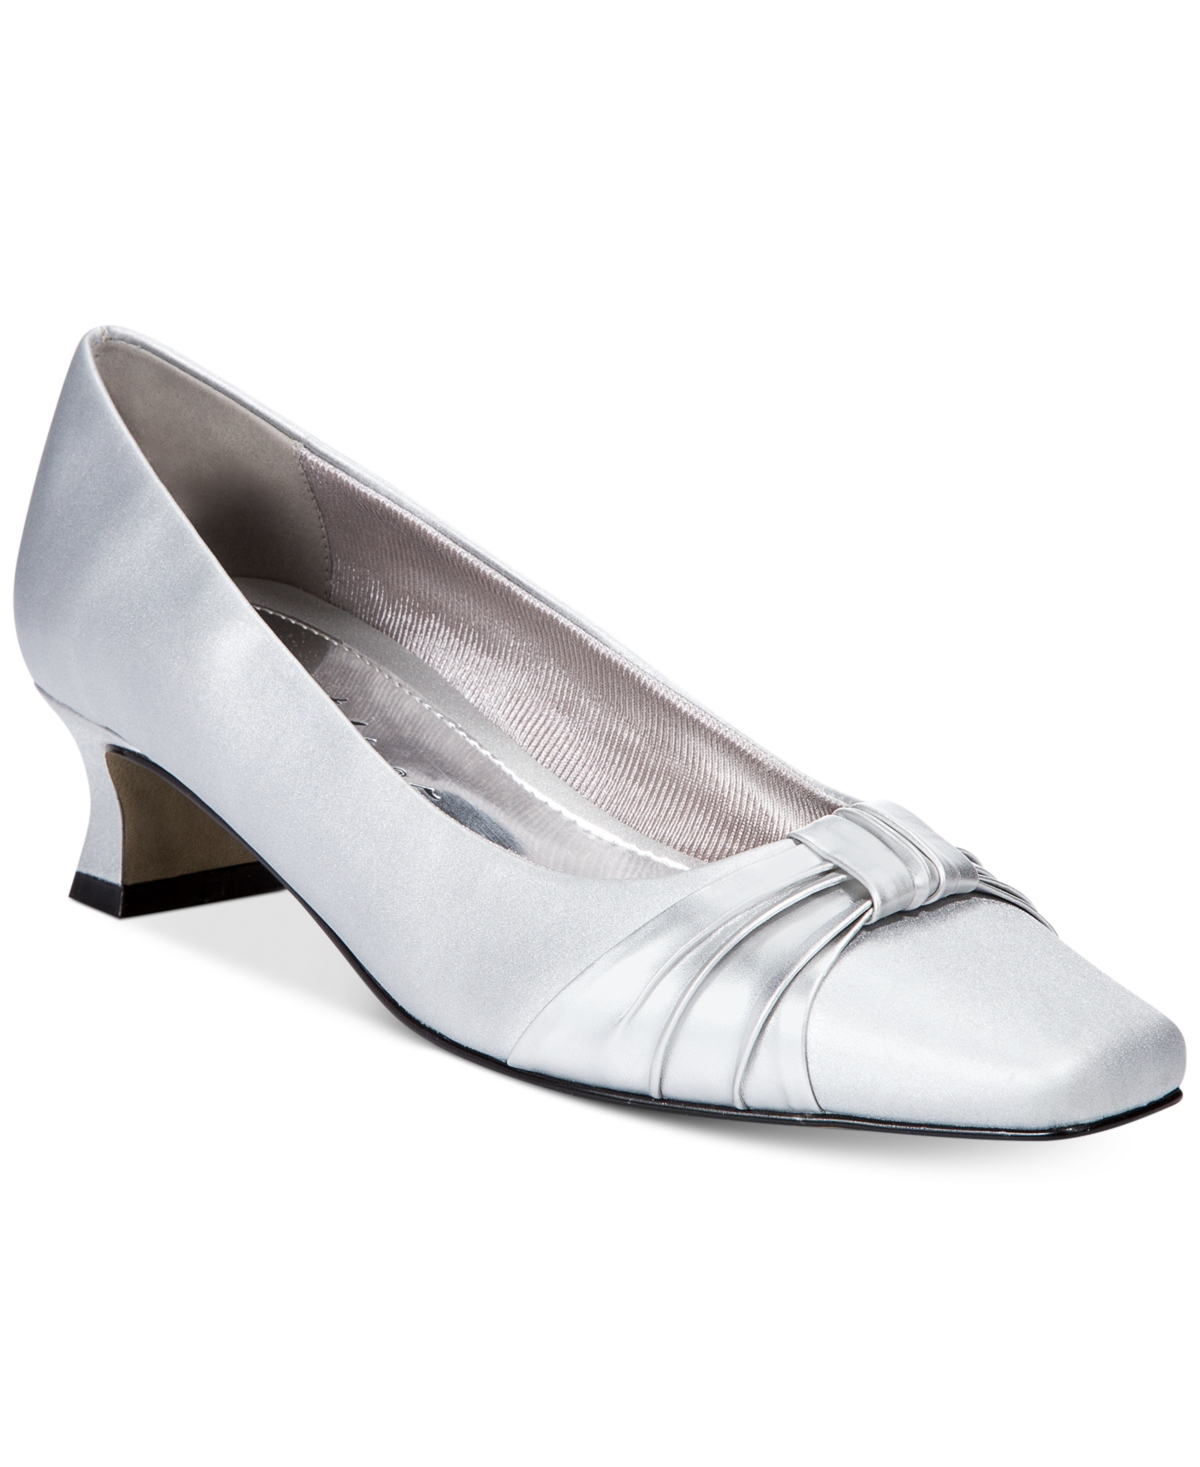 Waive Pumps - Silver